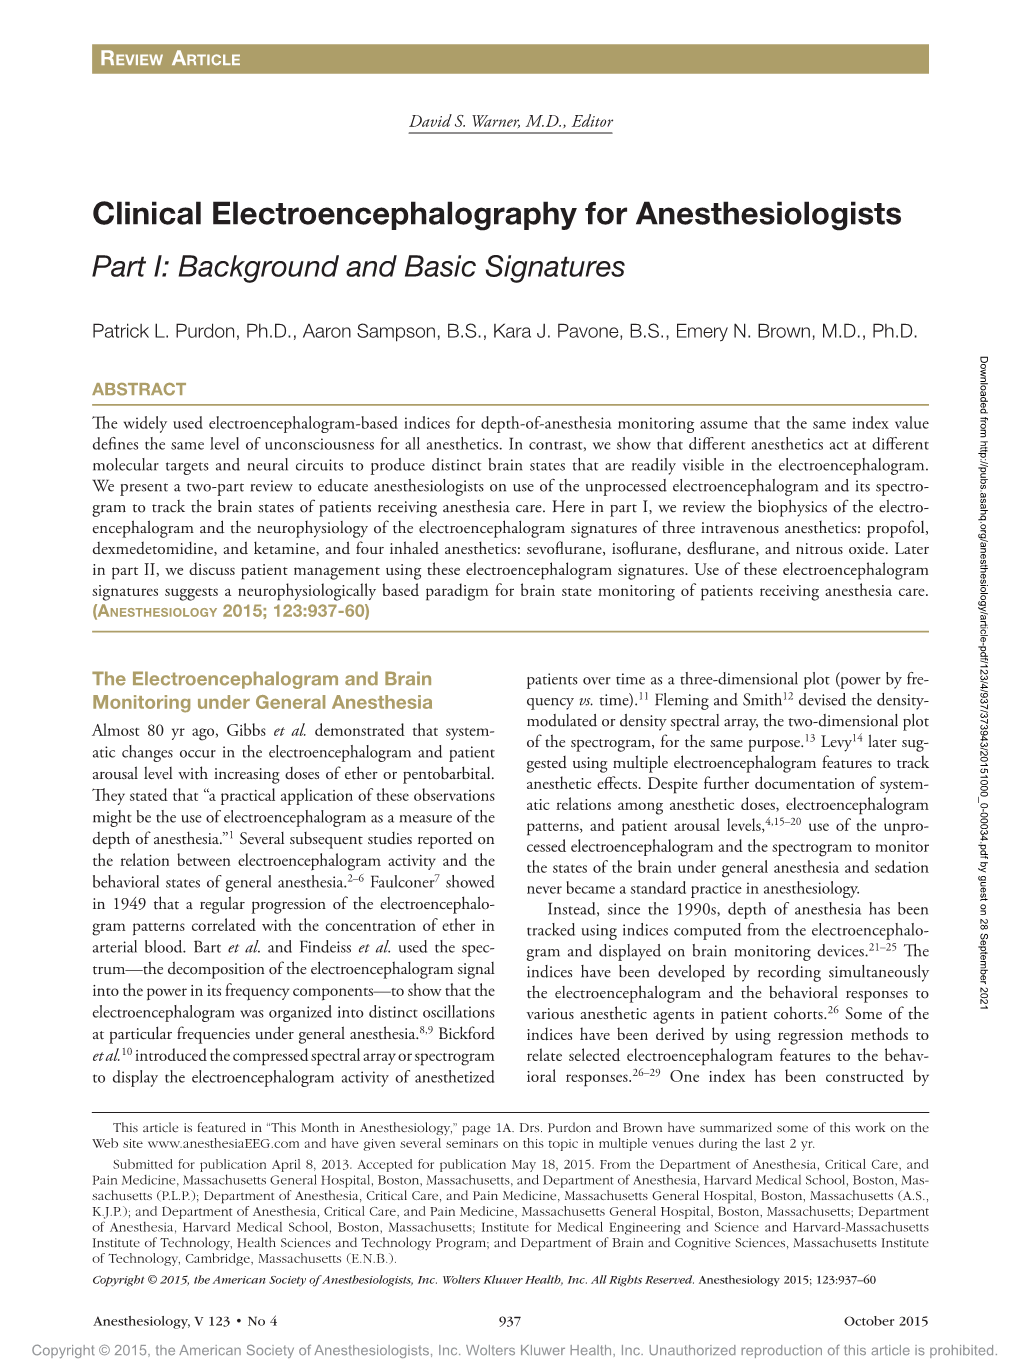 Clinical Electroencephalography for Anesthesiologists Part I: Background and Basic Signatures